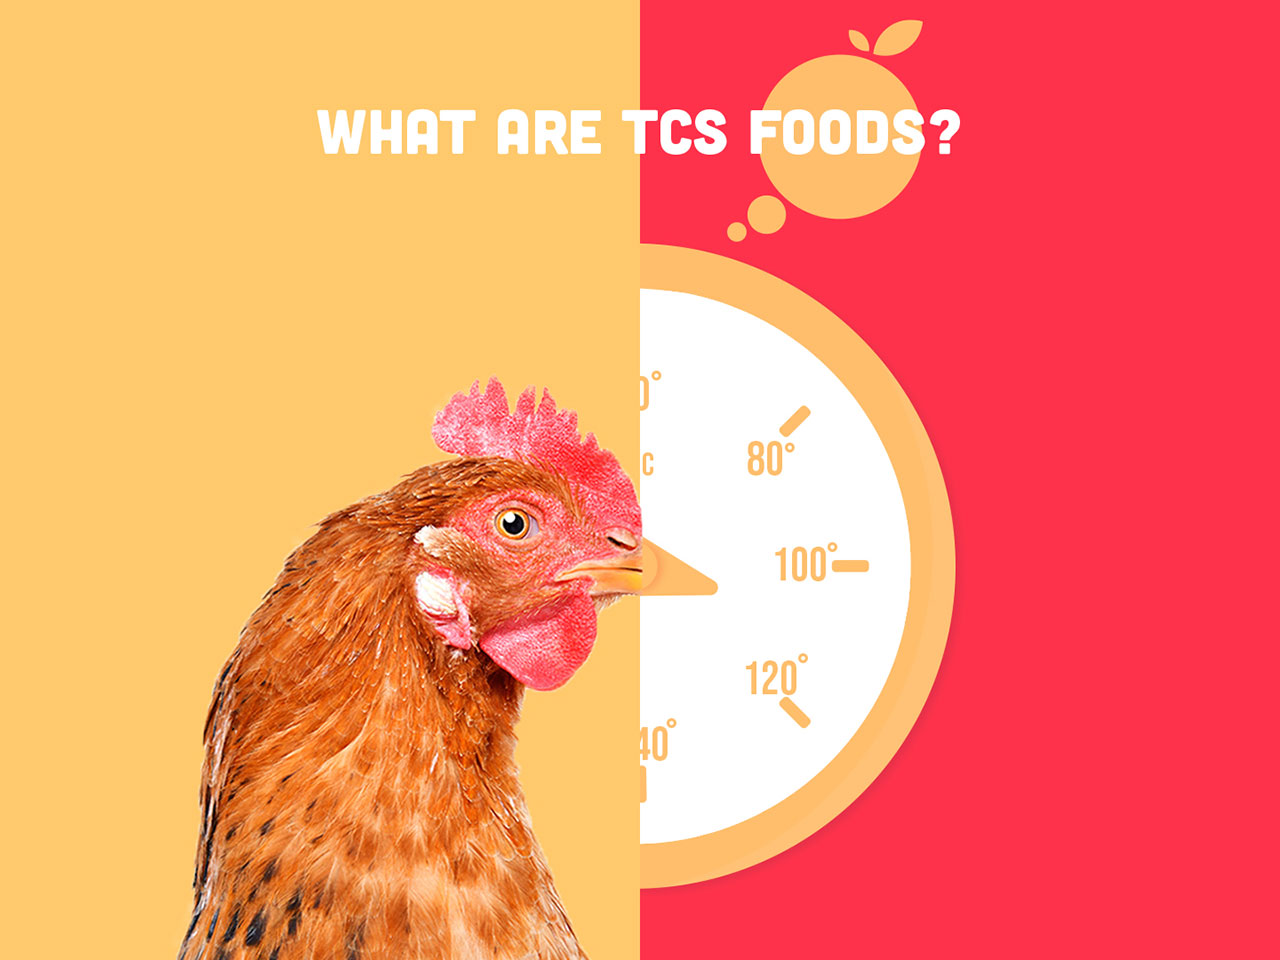 What are TCS foods?